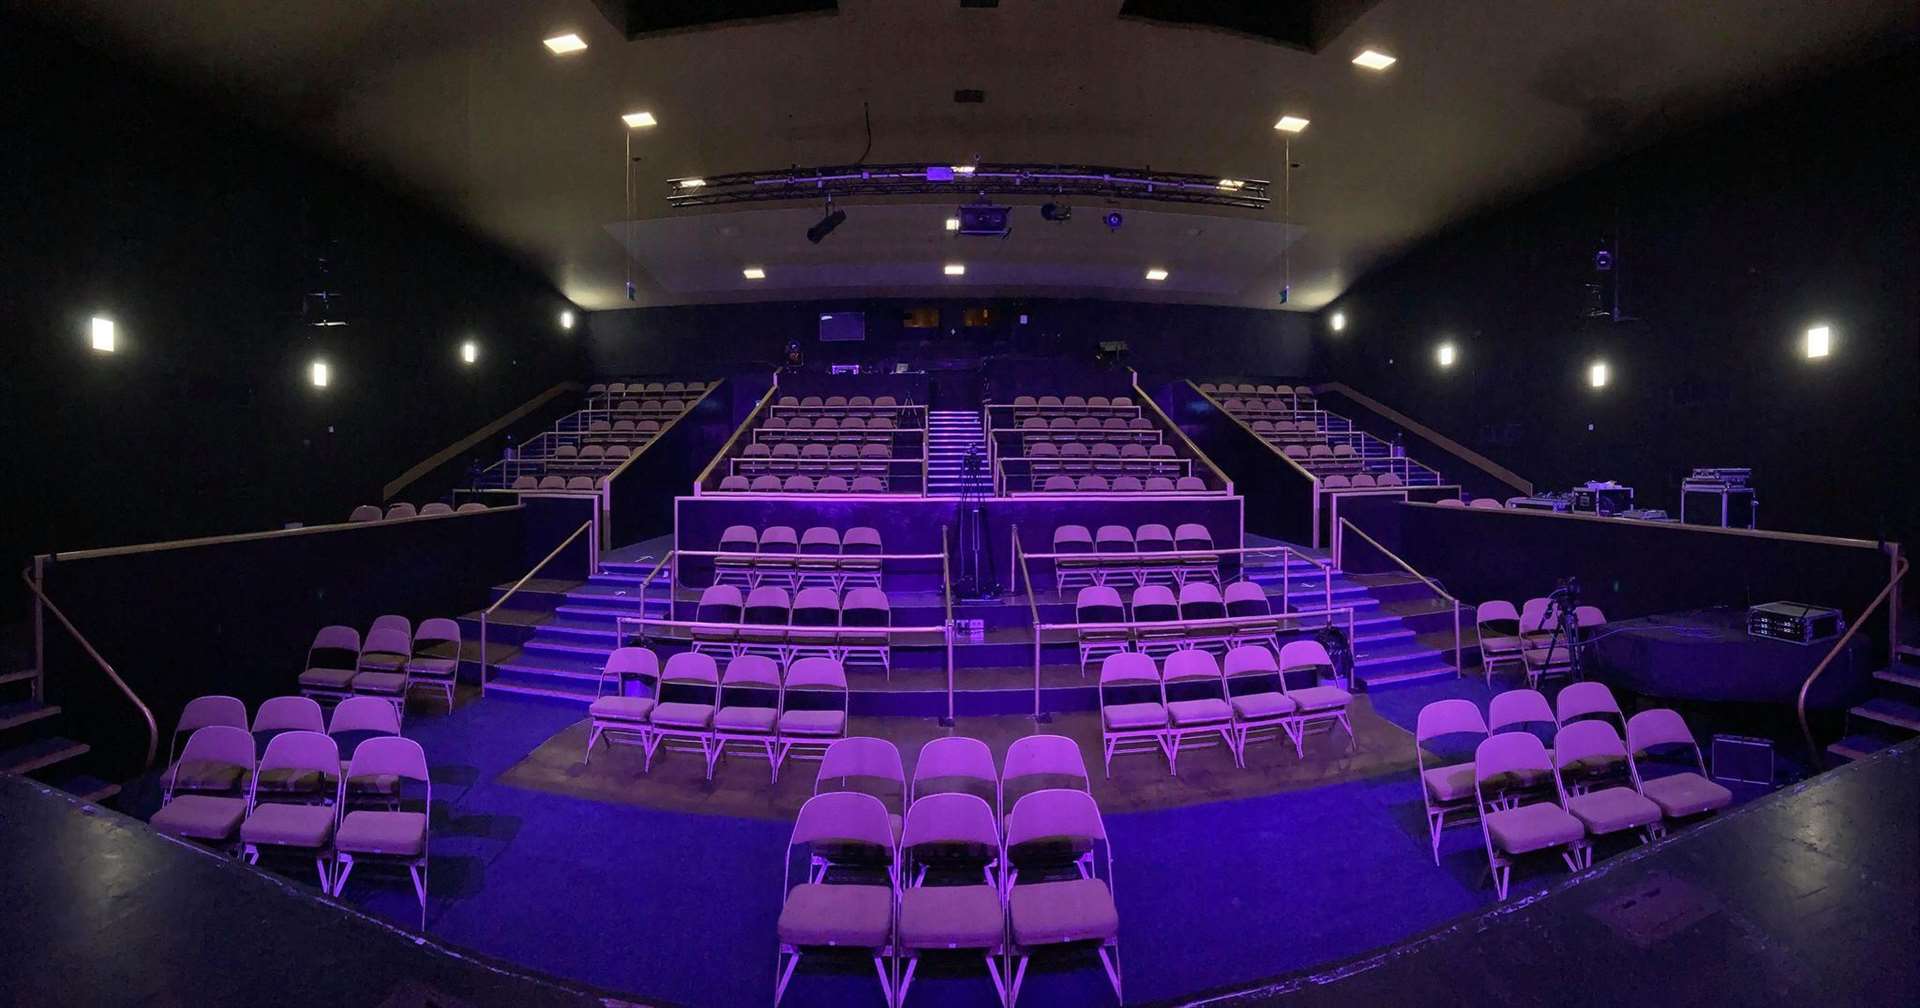 Aberdeen Arts Centre has adapted its 350 seat auditorium into 30 two-metre socially distanced "pods" to safely seat up to 150 audience members.